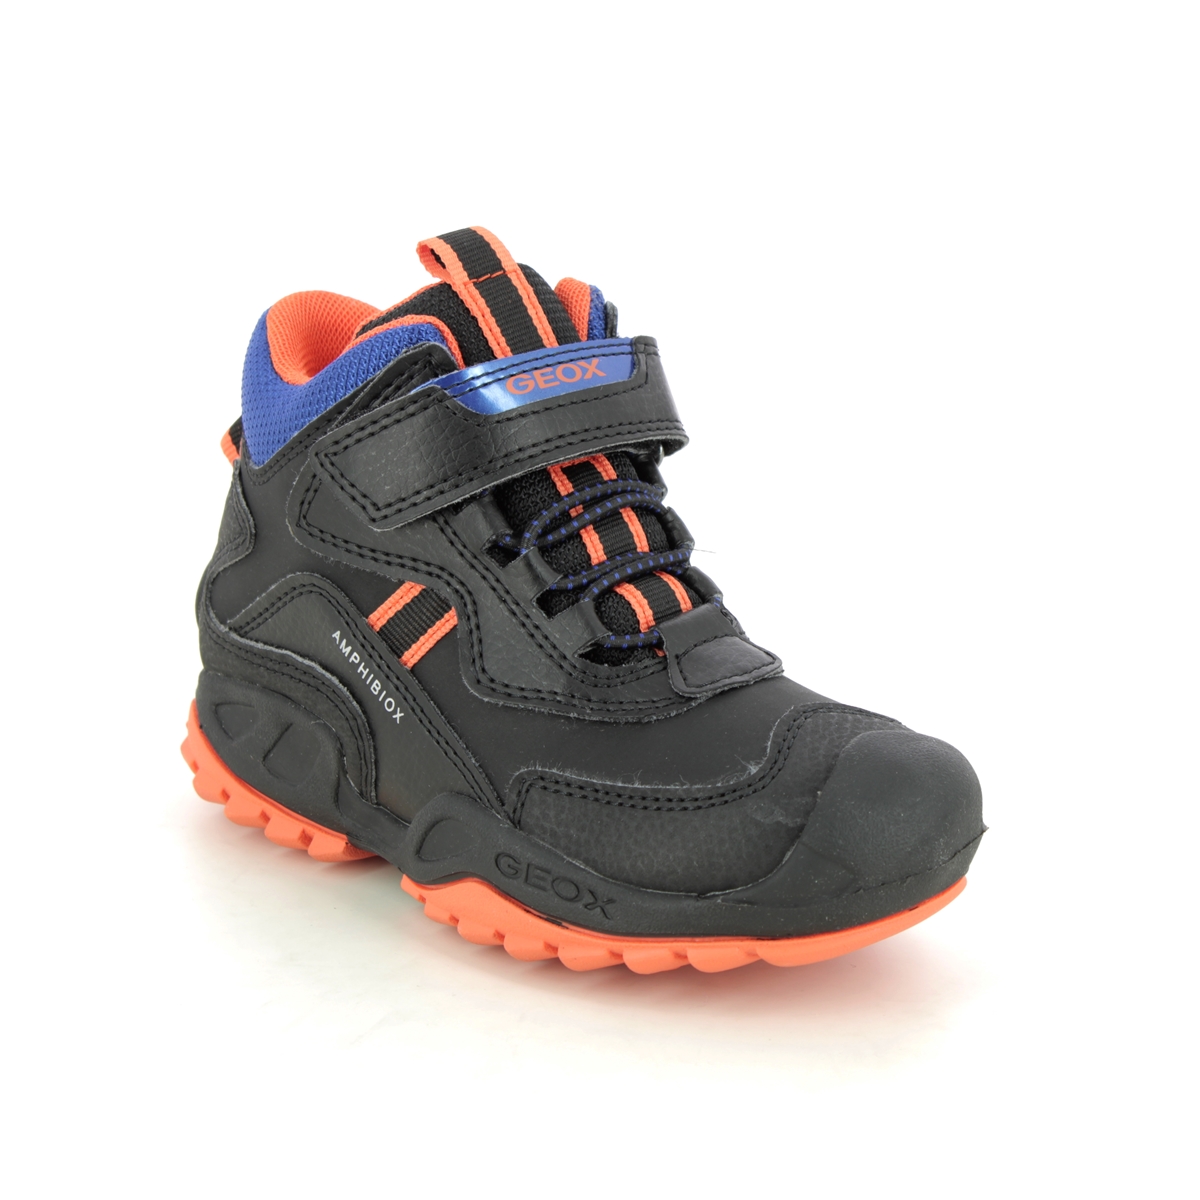 Geox - Savage Boot Tex (Black) J261Wb-C0399 In Size 29 In Plain Black For School For kids